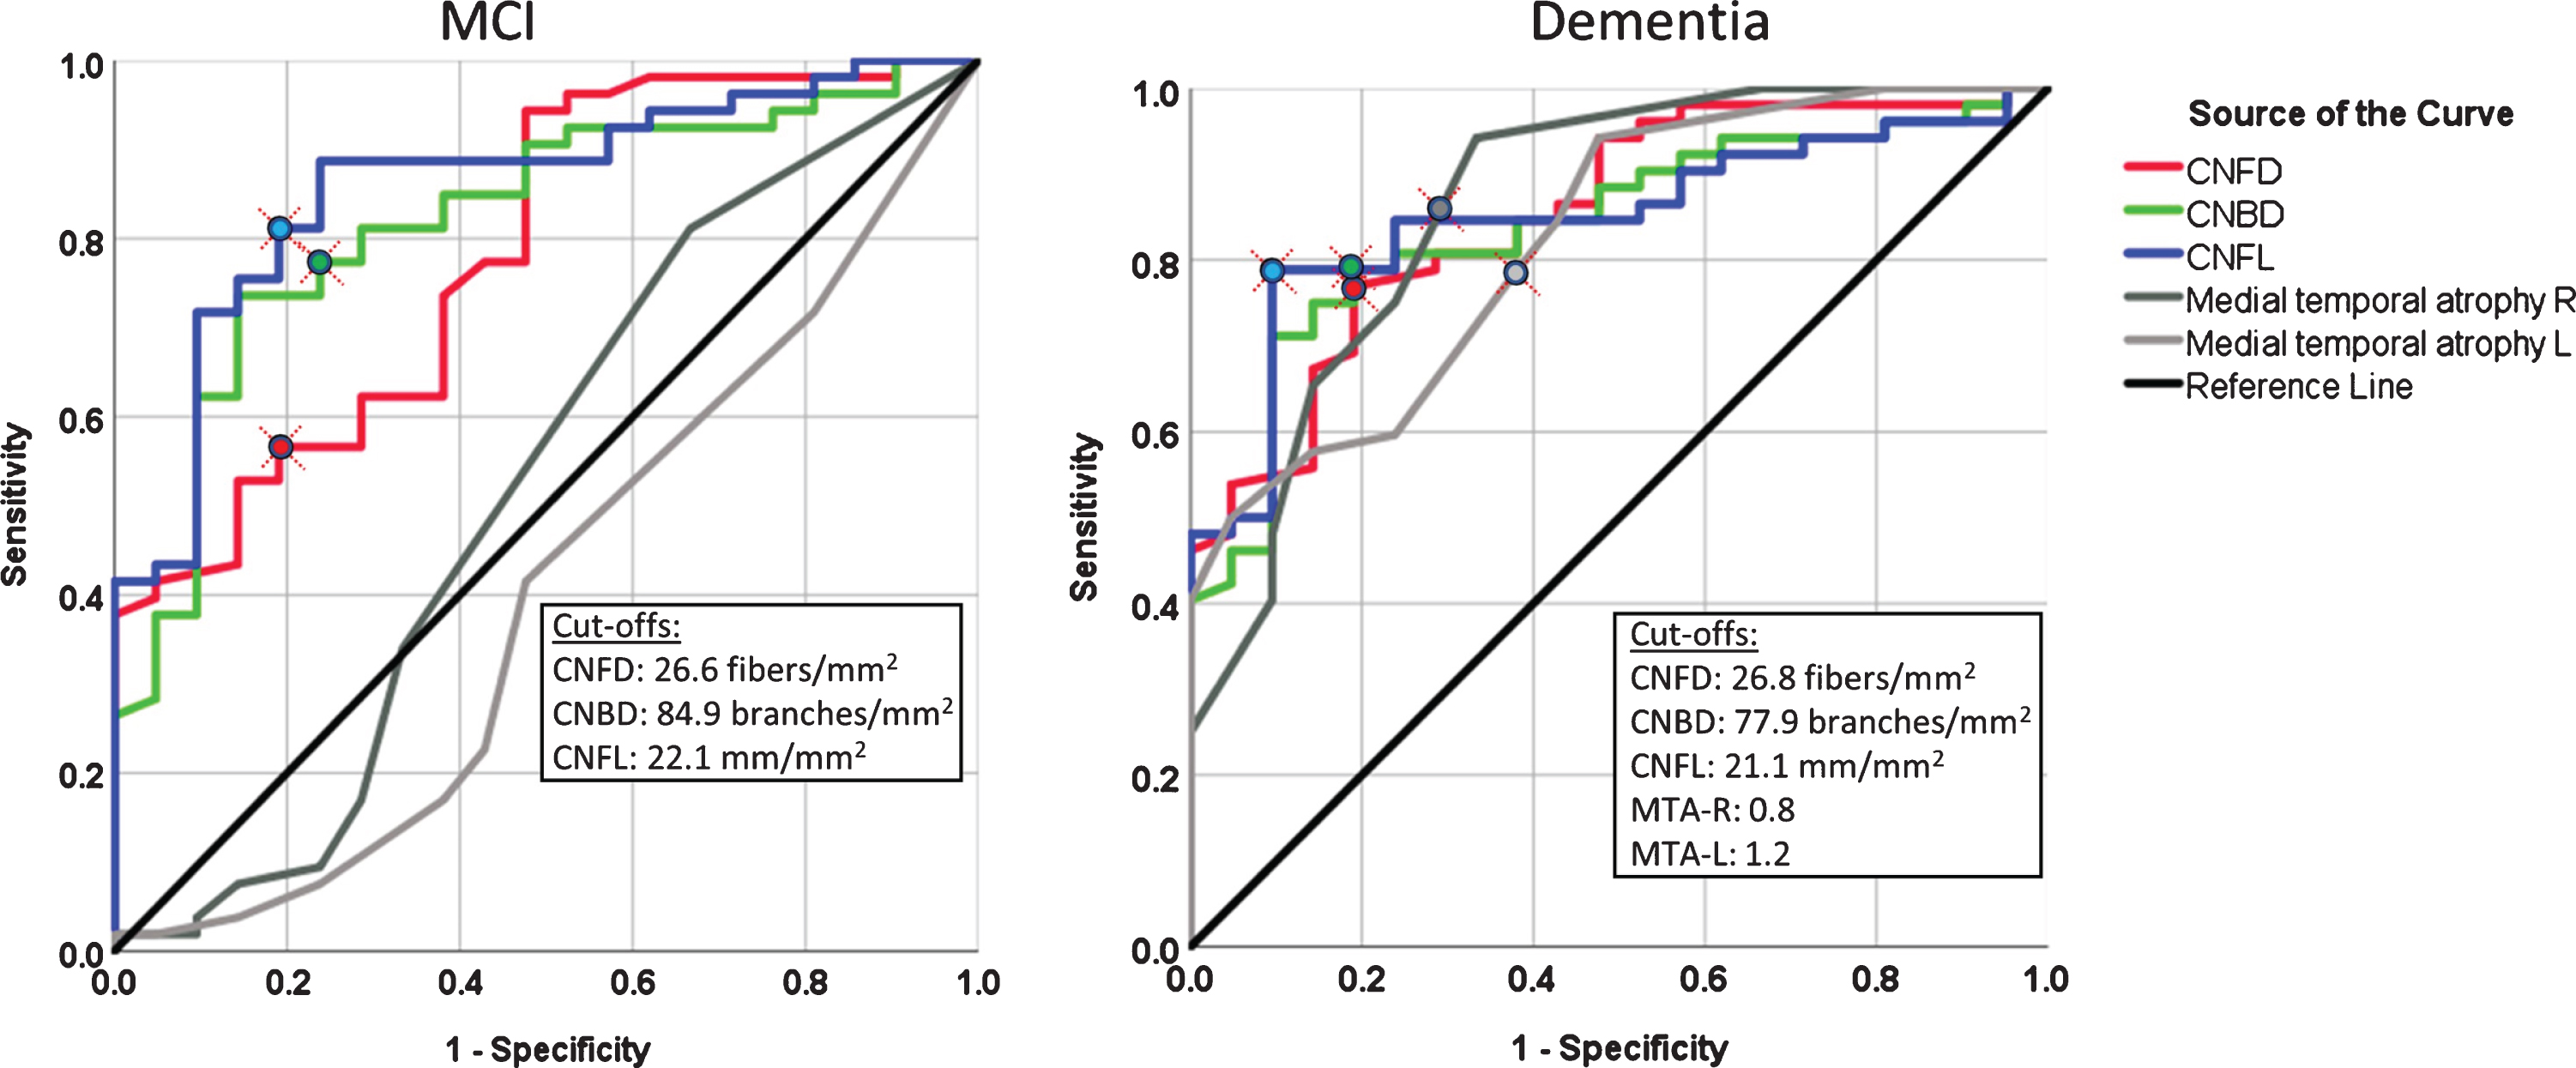 The diagnostic accuracy of corneal nerve fiber measures and medial temporal lobe atrophy rating for MCI and dementia. ROC analysis showing the area under the curve for corneal nerve fiber measures and right and left medial temporal lobe atrophy (MTA) rating.